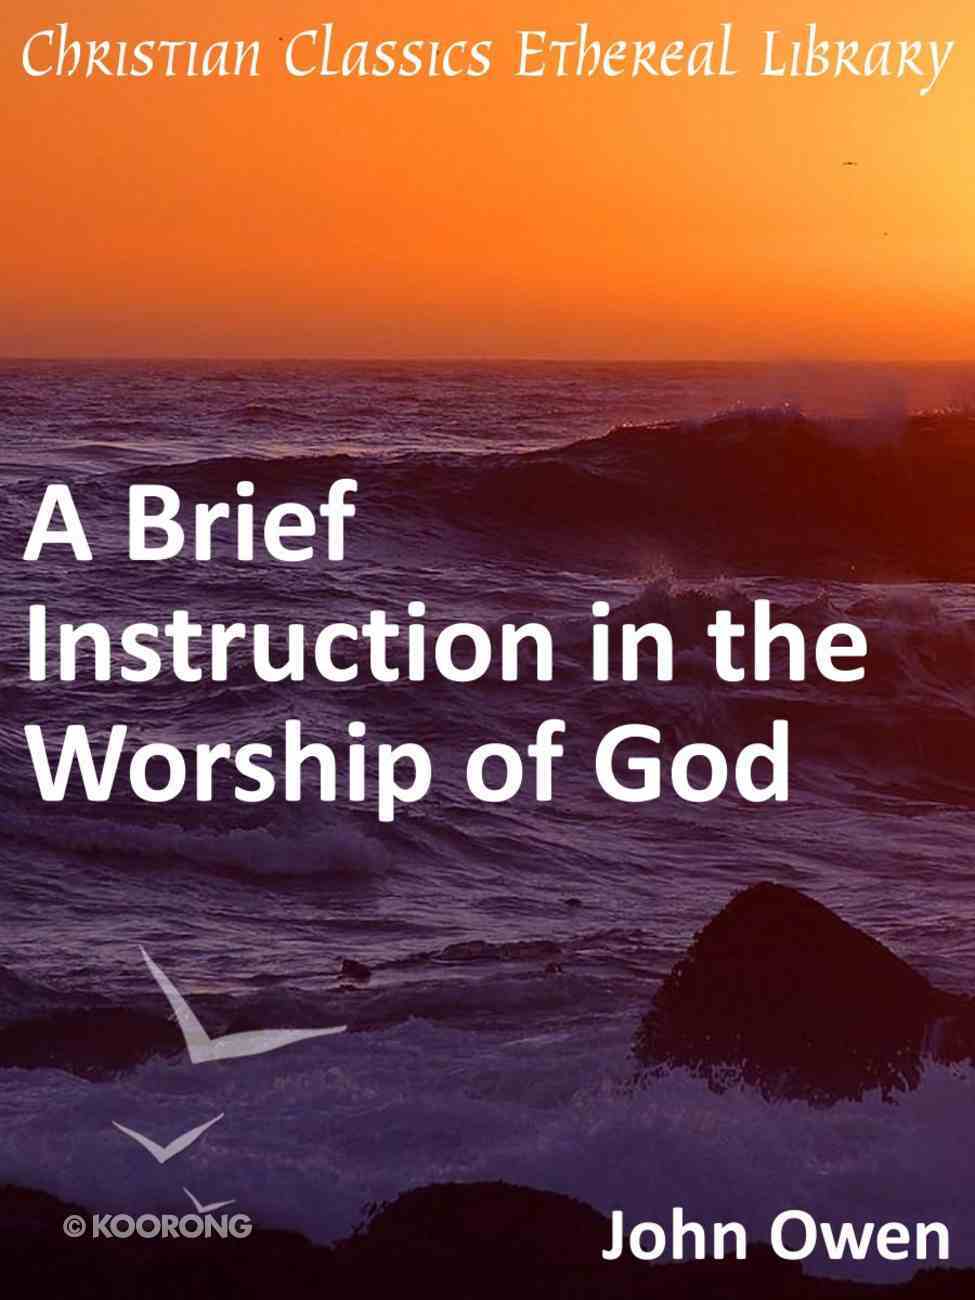 DOWNLOAD PDF: Brief Instruction in the Worship of God by John Owen 17